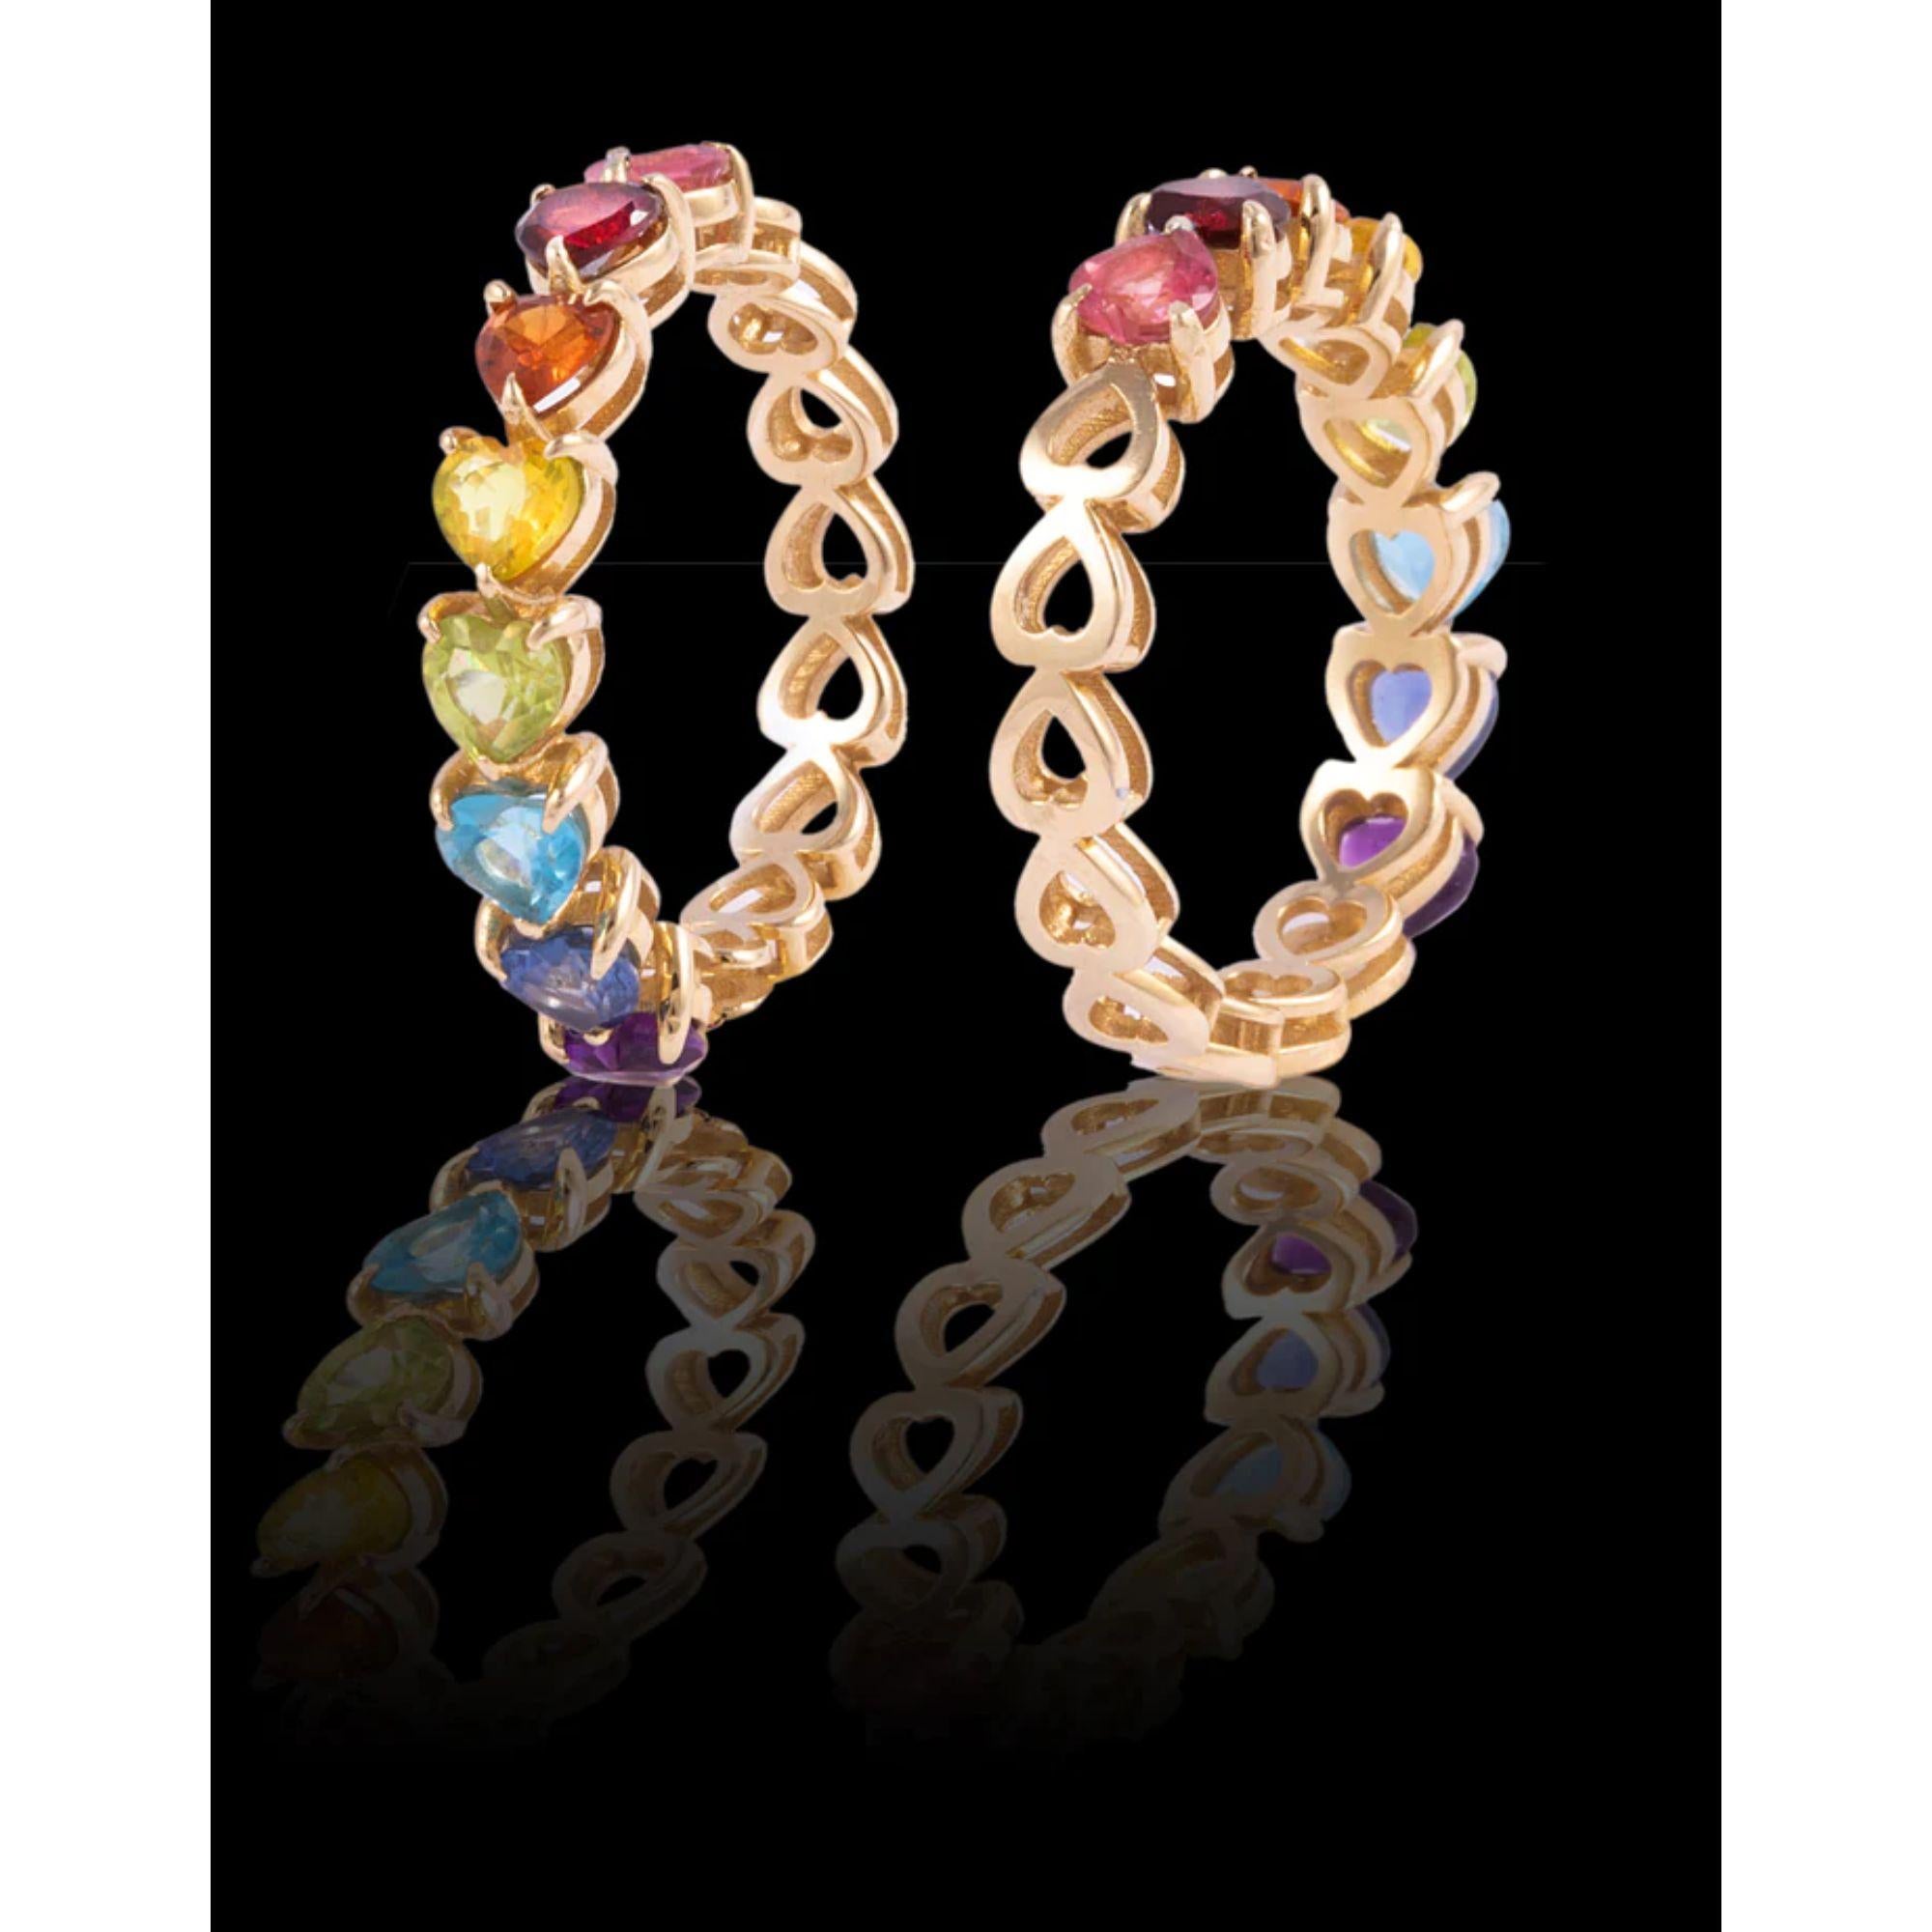 As the first fine jewelry piece from the house of Mordekai, we are celebrating one of our iconic themes, the Rainbow. This unique ring is made of 14k gold, and hand-set with the finest hand-selected, colored stones and gems sourced from all over the